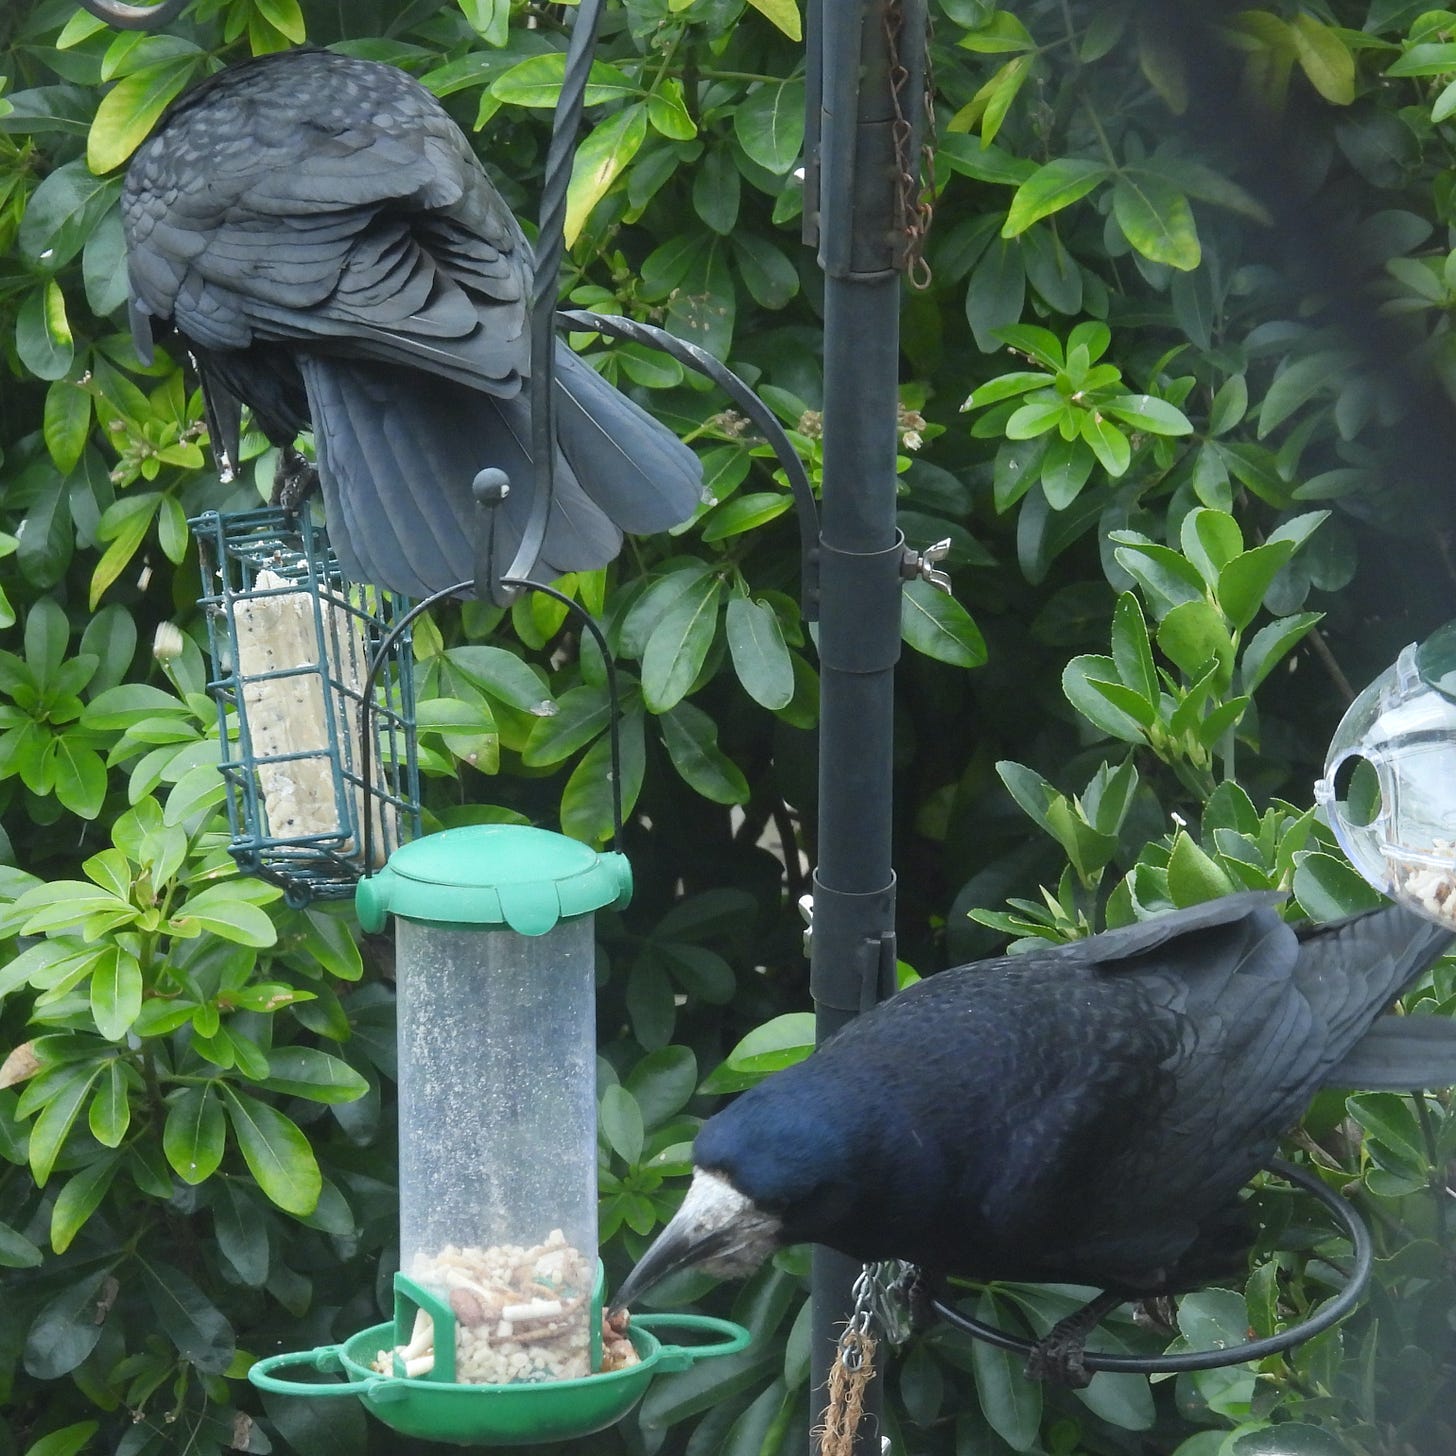 Alt text: Two Rooks on feeders - one facing to the left taking suet pellets, the other facing away on the suet block